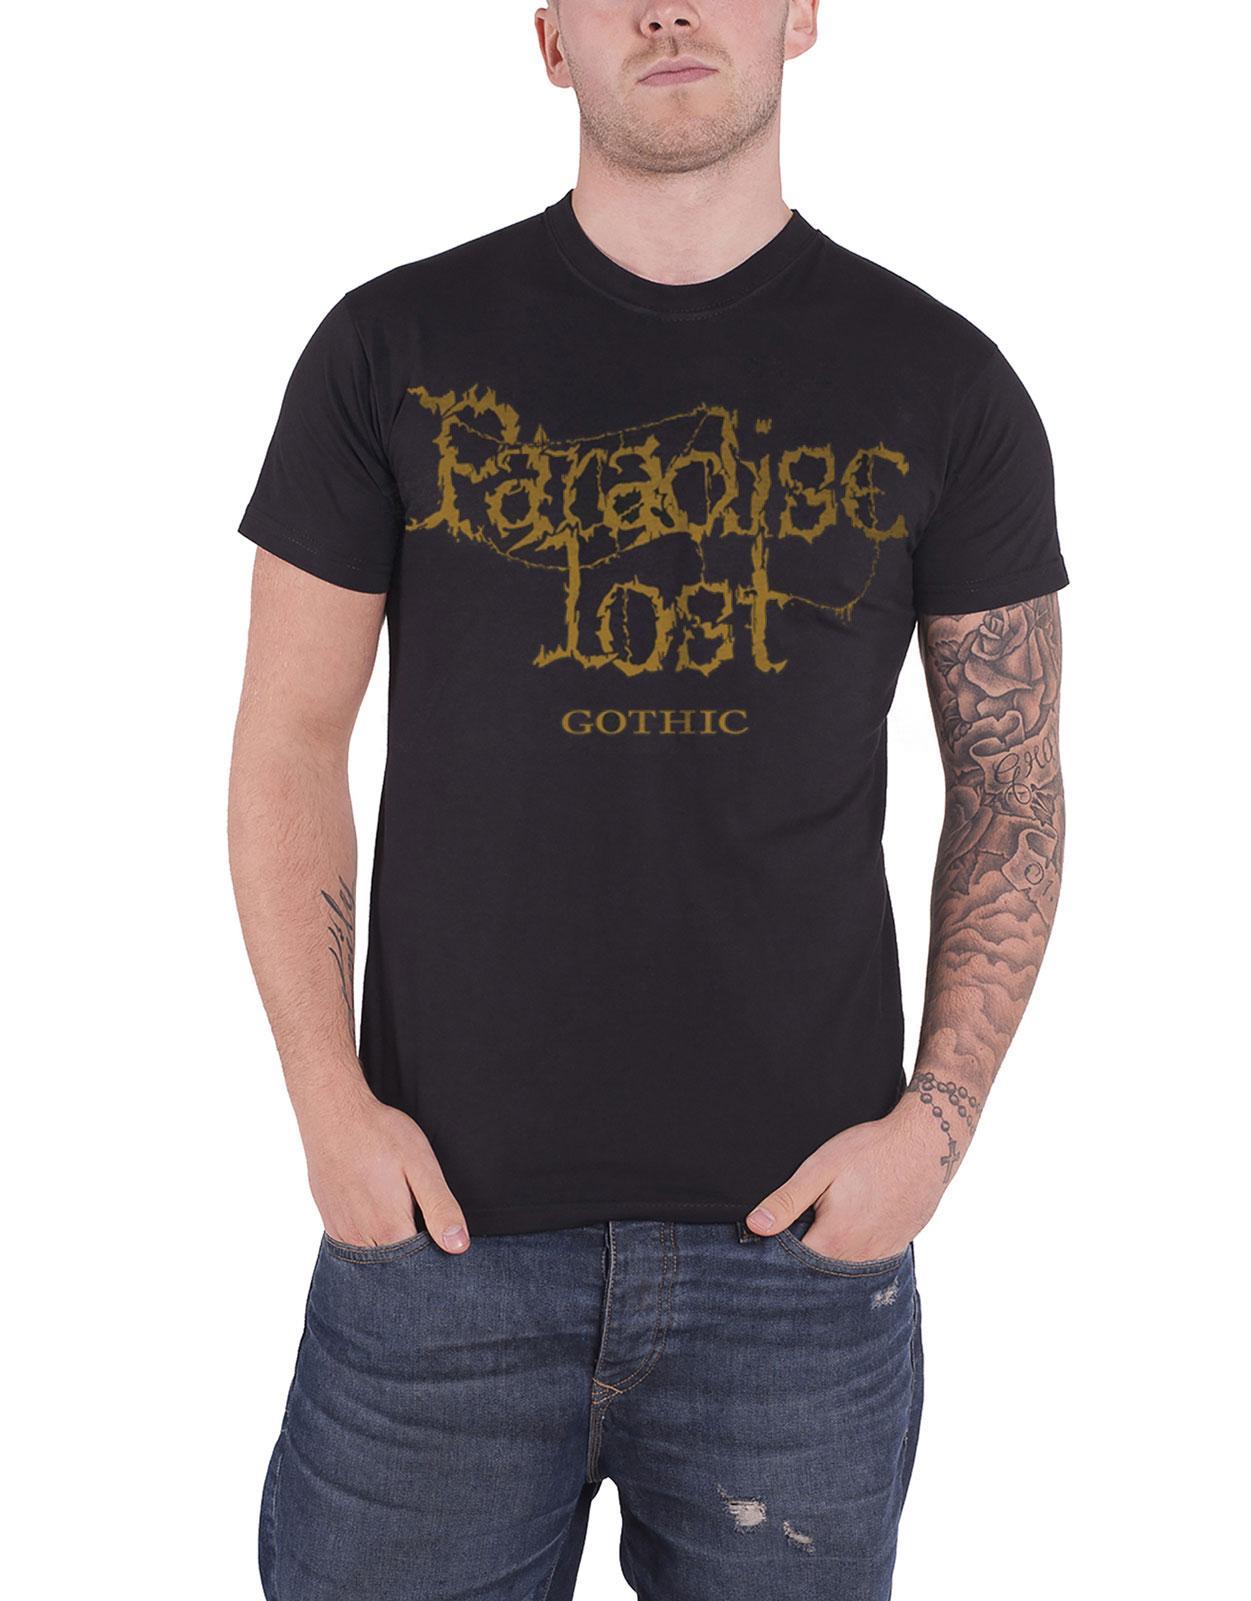 Paradise Lost T Shirt Gothic Band Logo new Official Mens Black